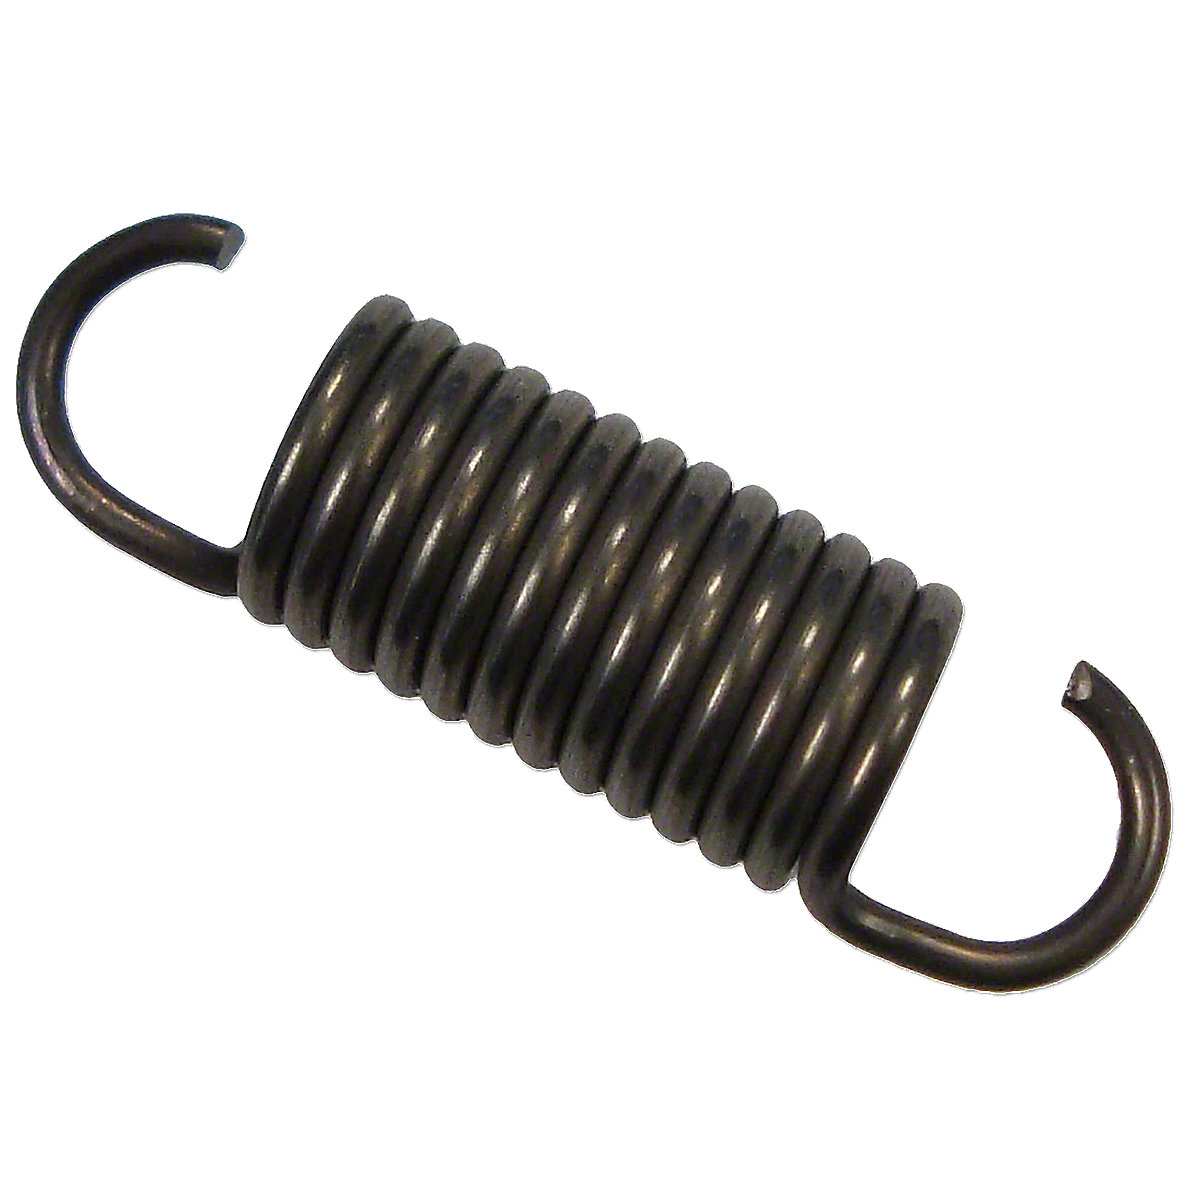 Internal Governor Spring used on Farmall C, Super C and 200 Or Brake Positioning Spring used on 404, 504 & 606